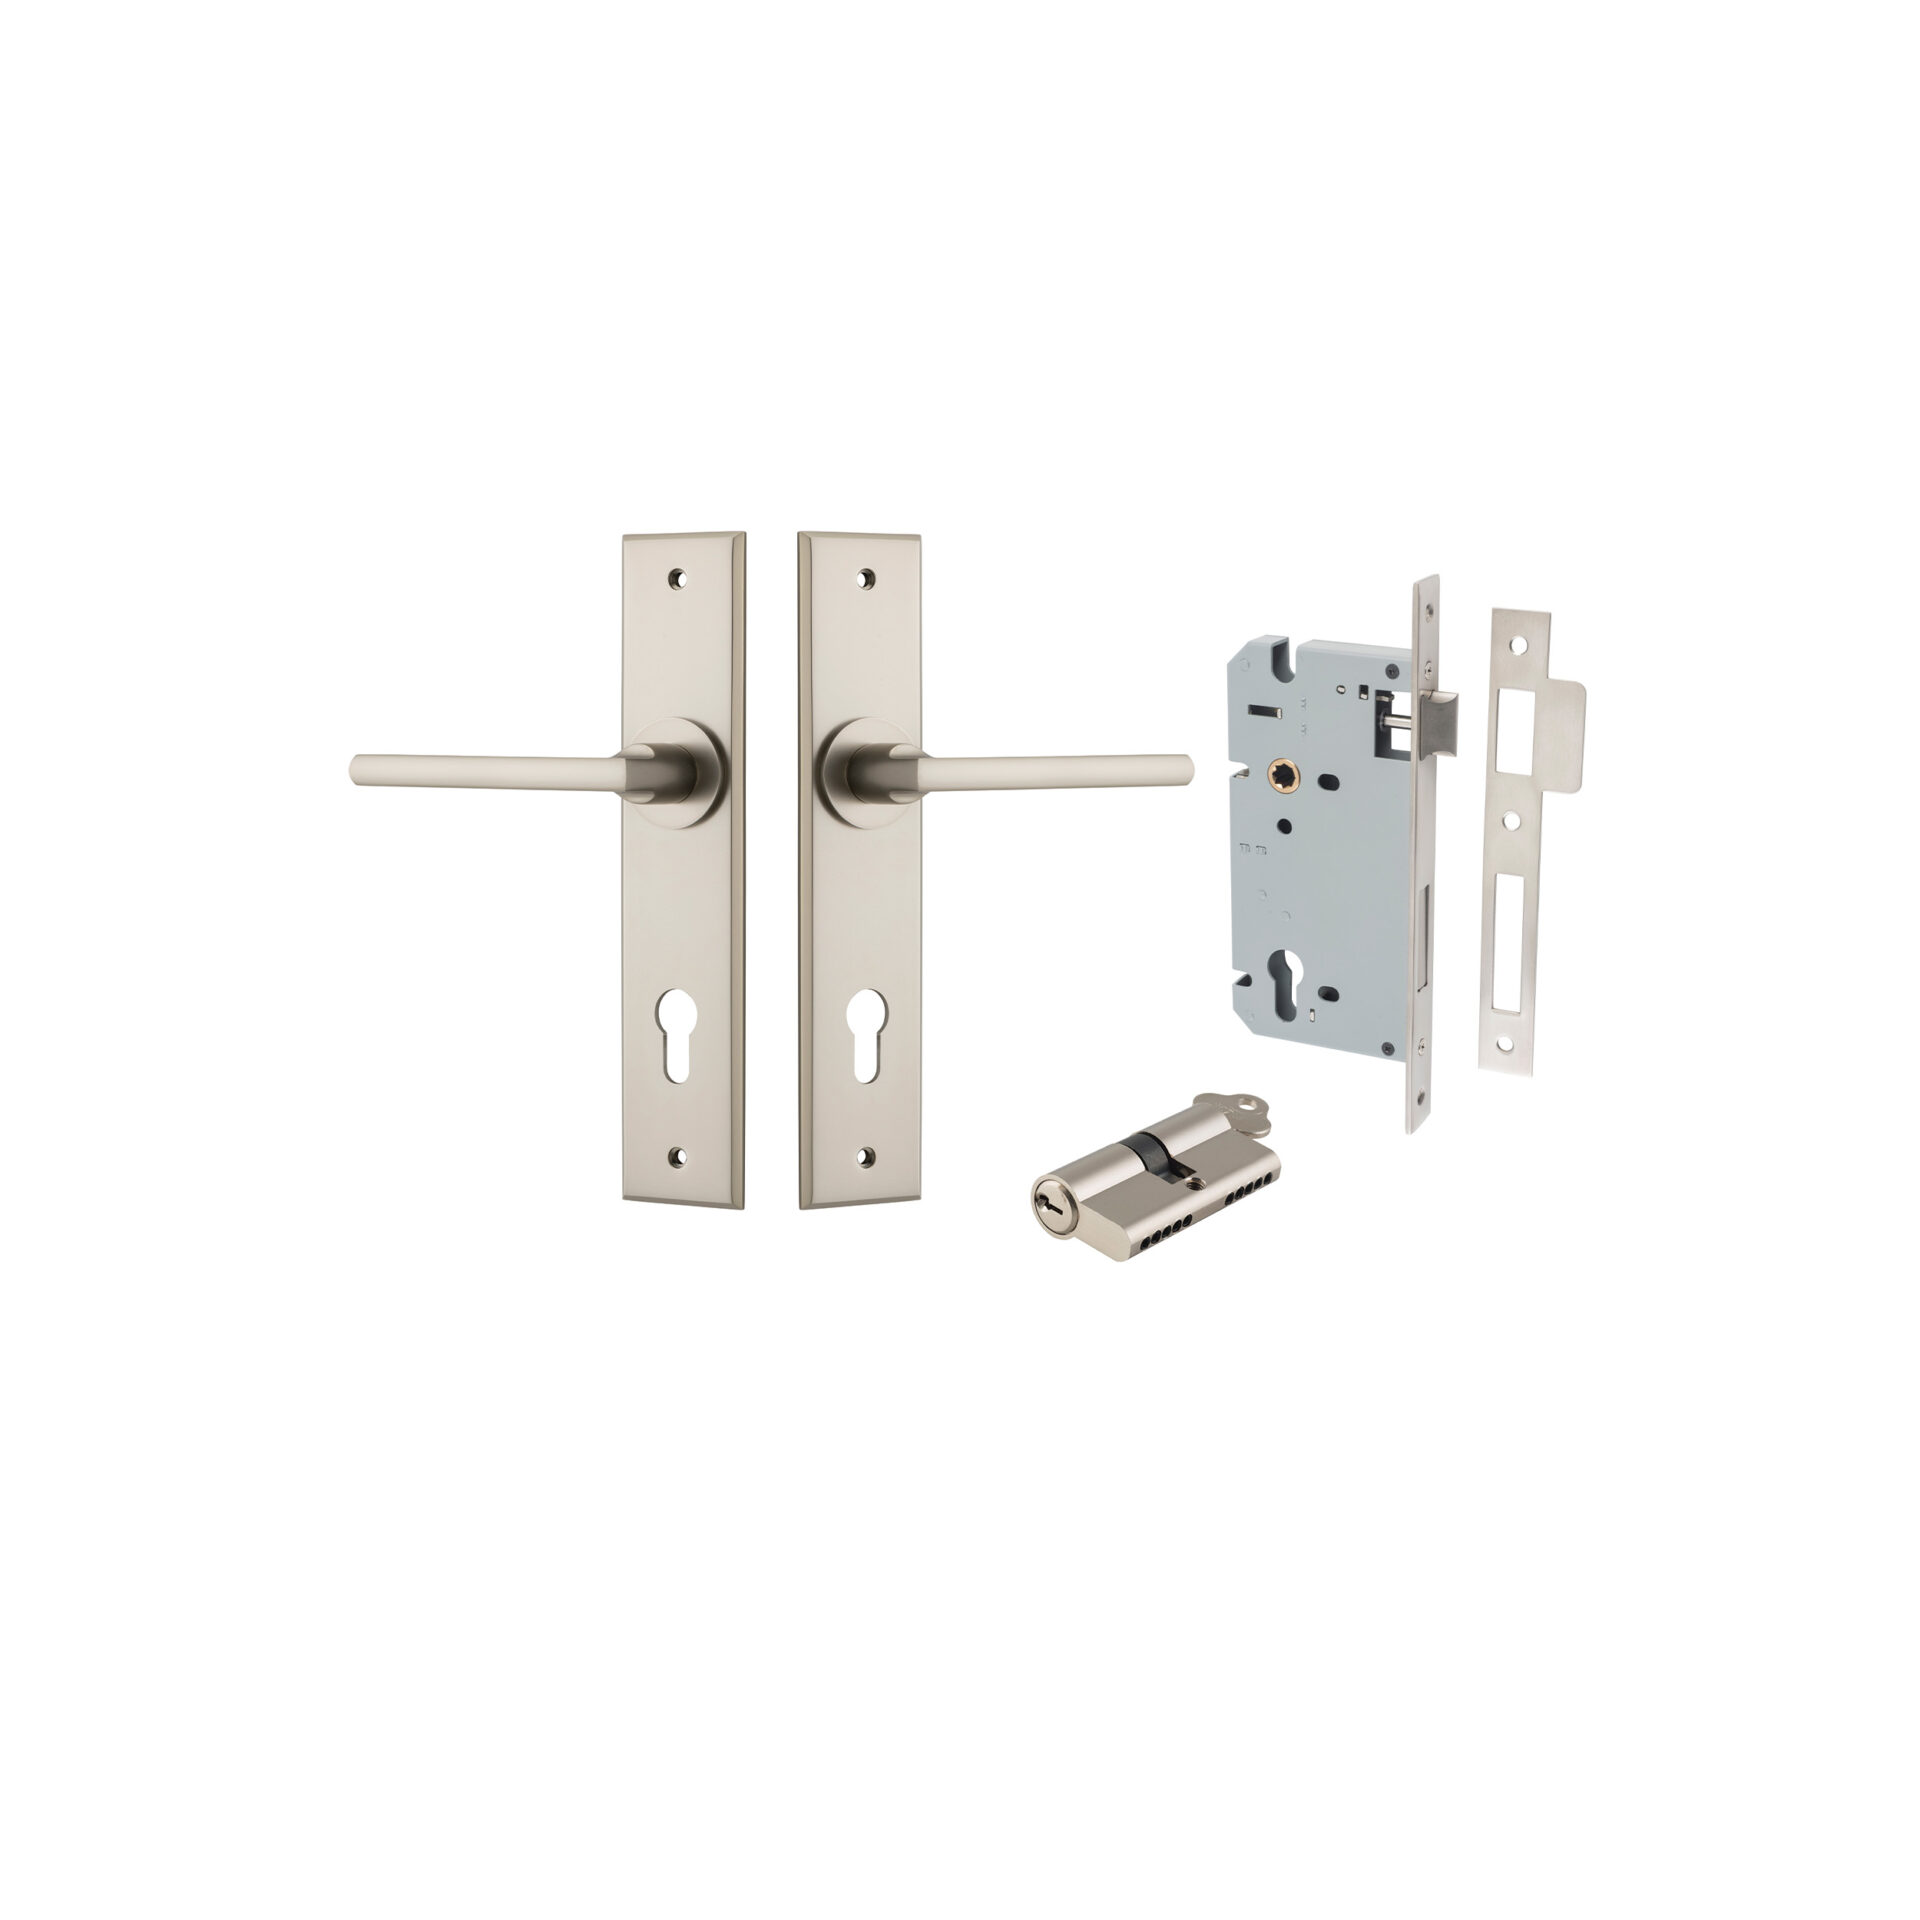 14782KENTR60KK - Baltimore Lever - Chamfered Backplate Entrance Kit with High Security Lock - Satin Nickel - Entrance